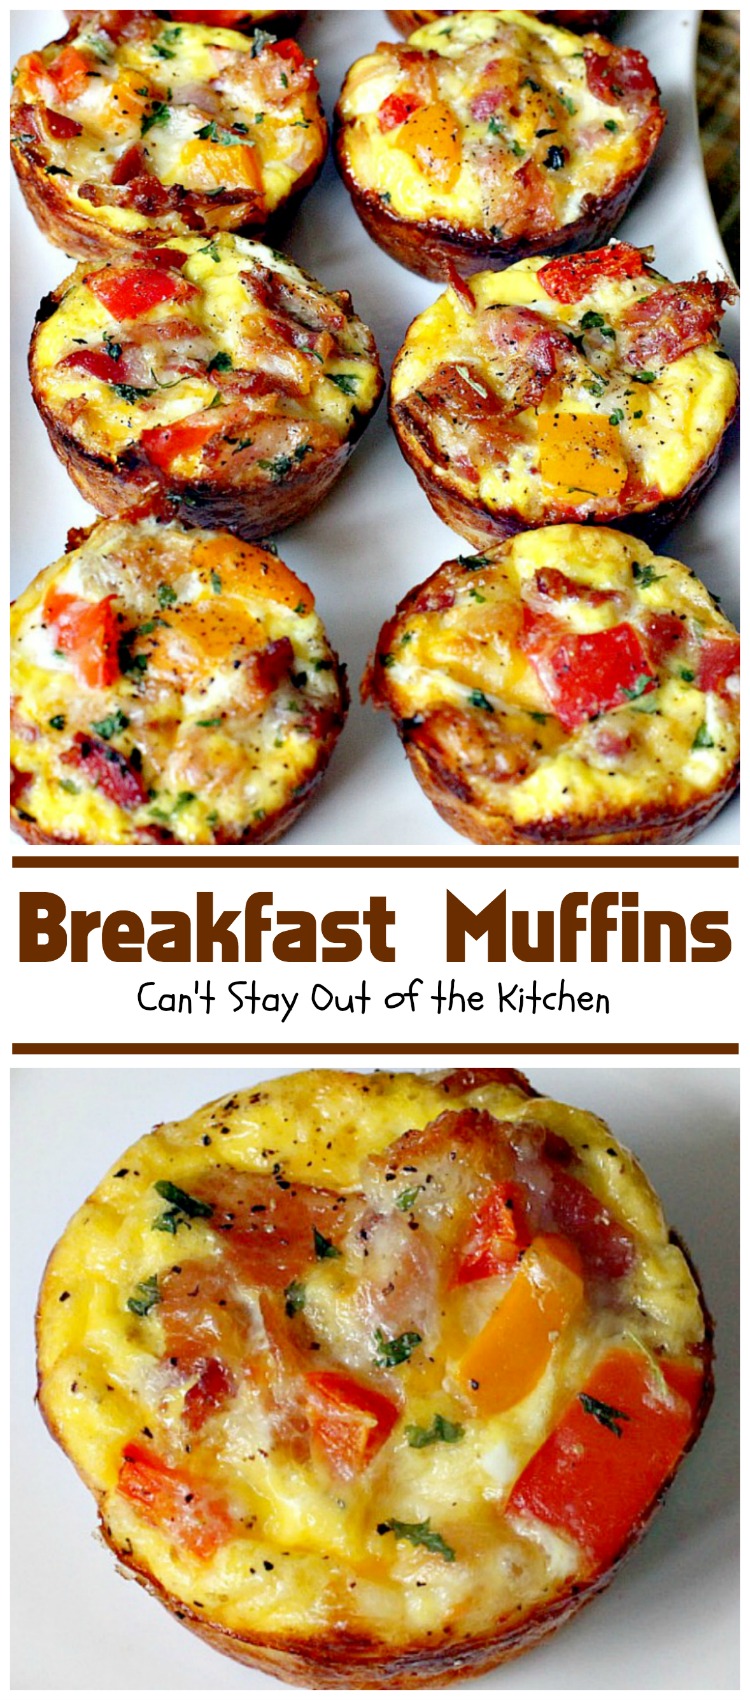 Breakfast Muffins | Can't Stay Out of the Kitchen